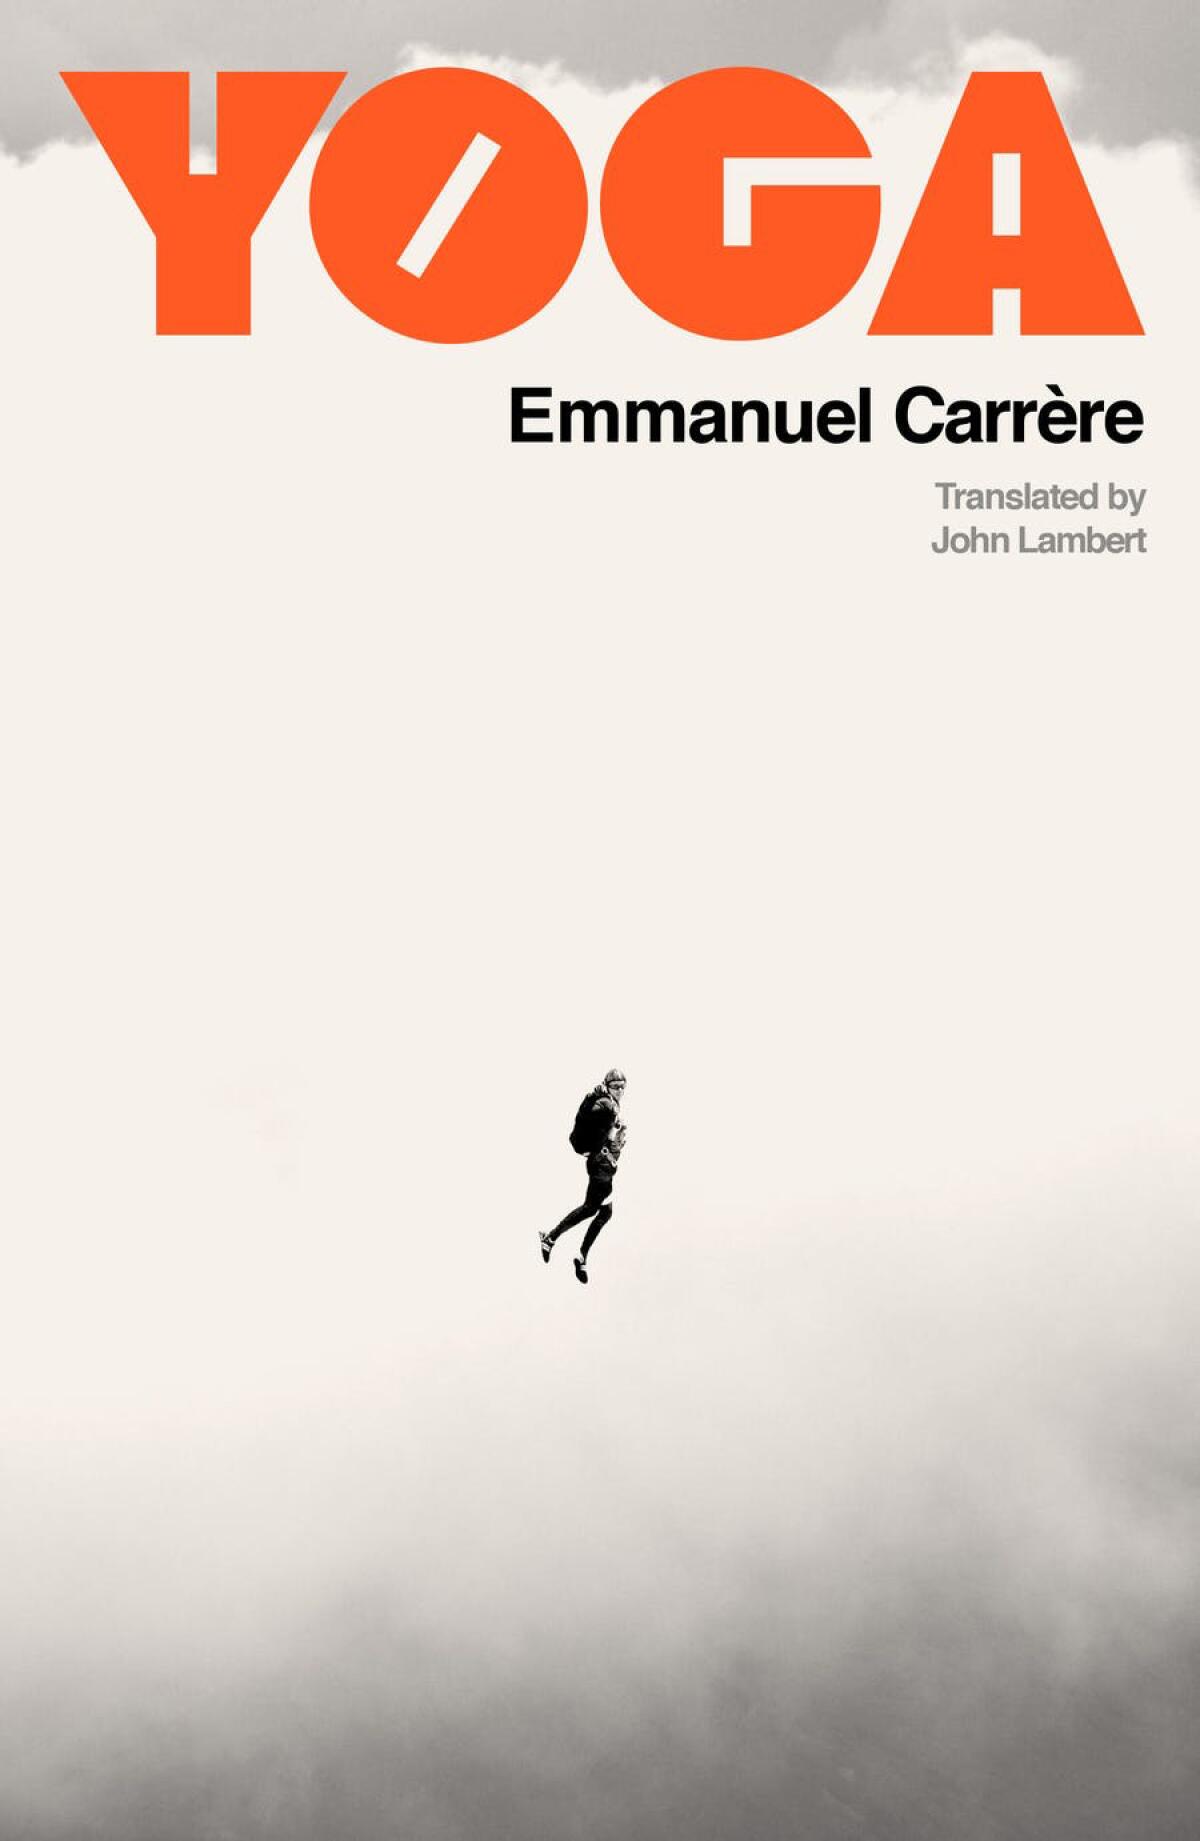 "Yoga" by Emmanuel Carrère, translated from French by John Lambert